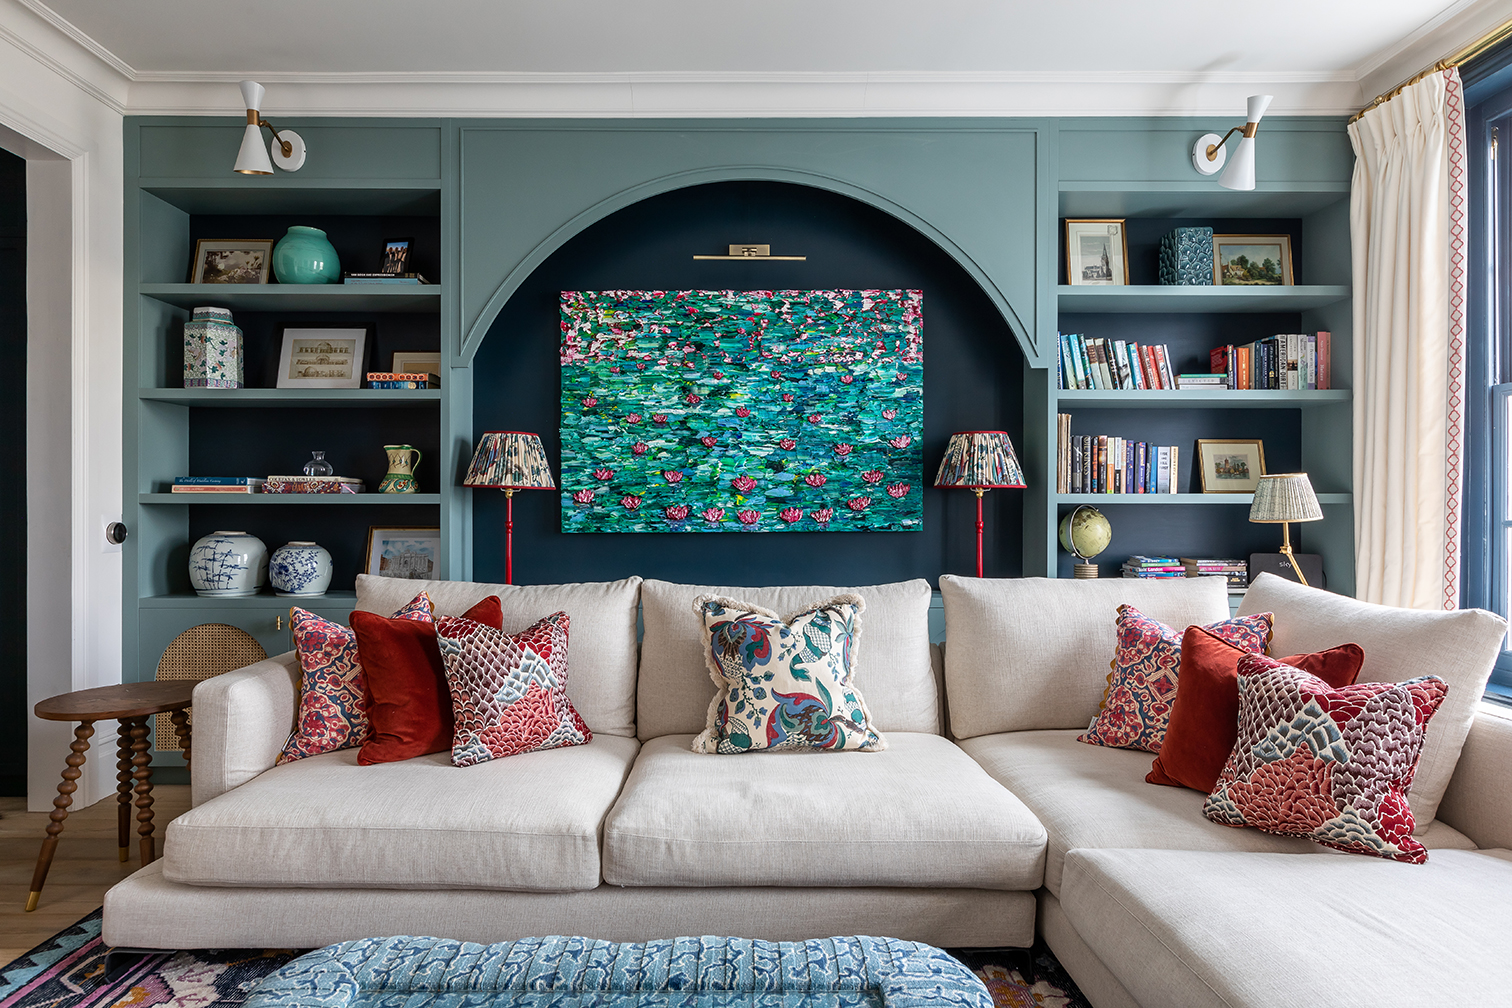 sectional sofa in front of teal arched niche